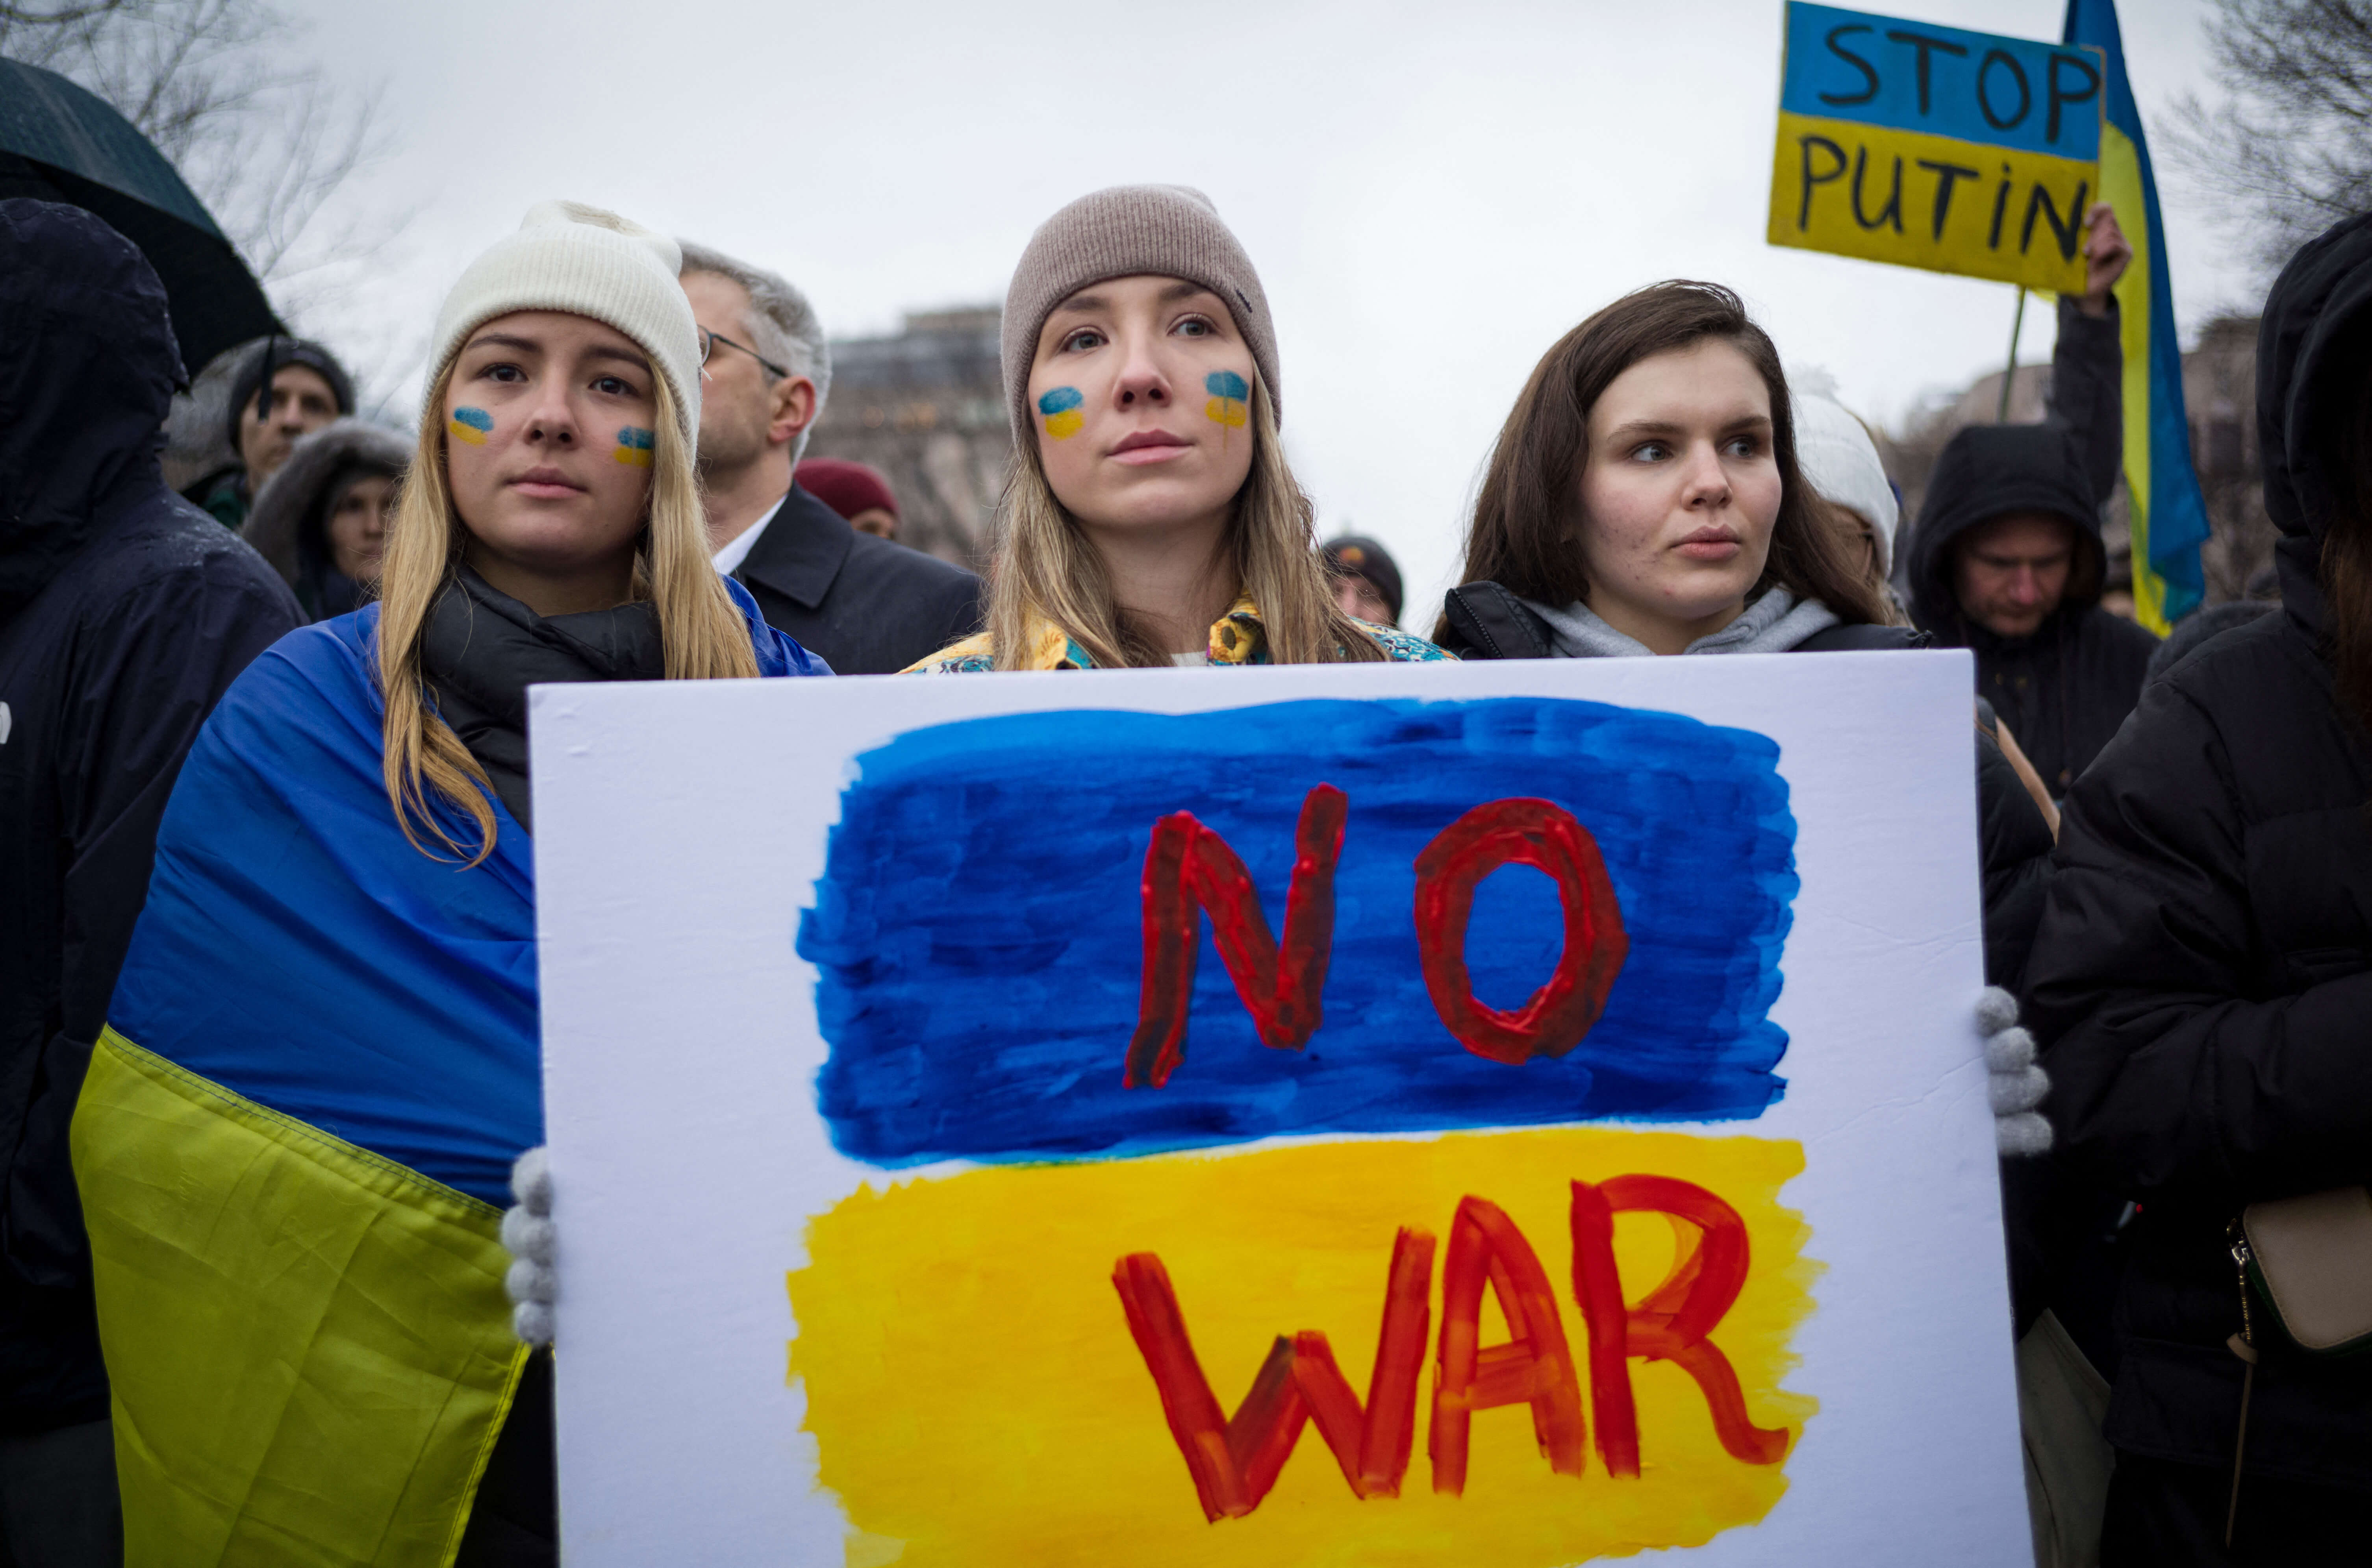 How will the sanctions on Russia affect university students?